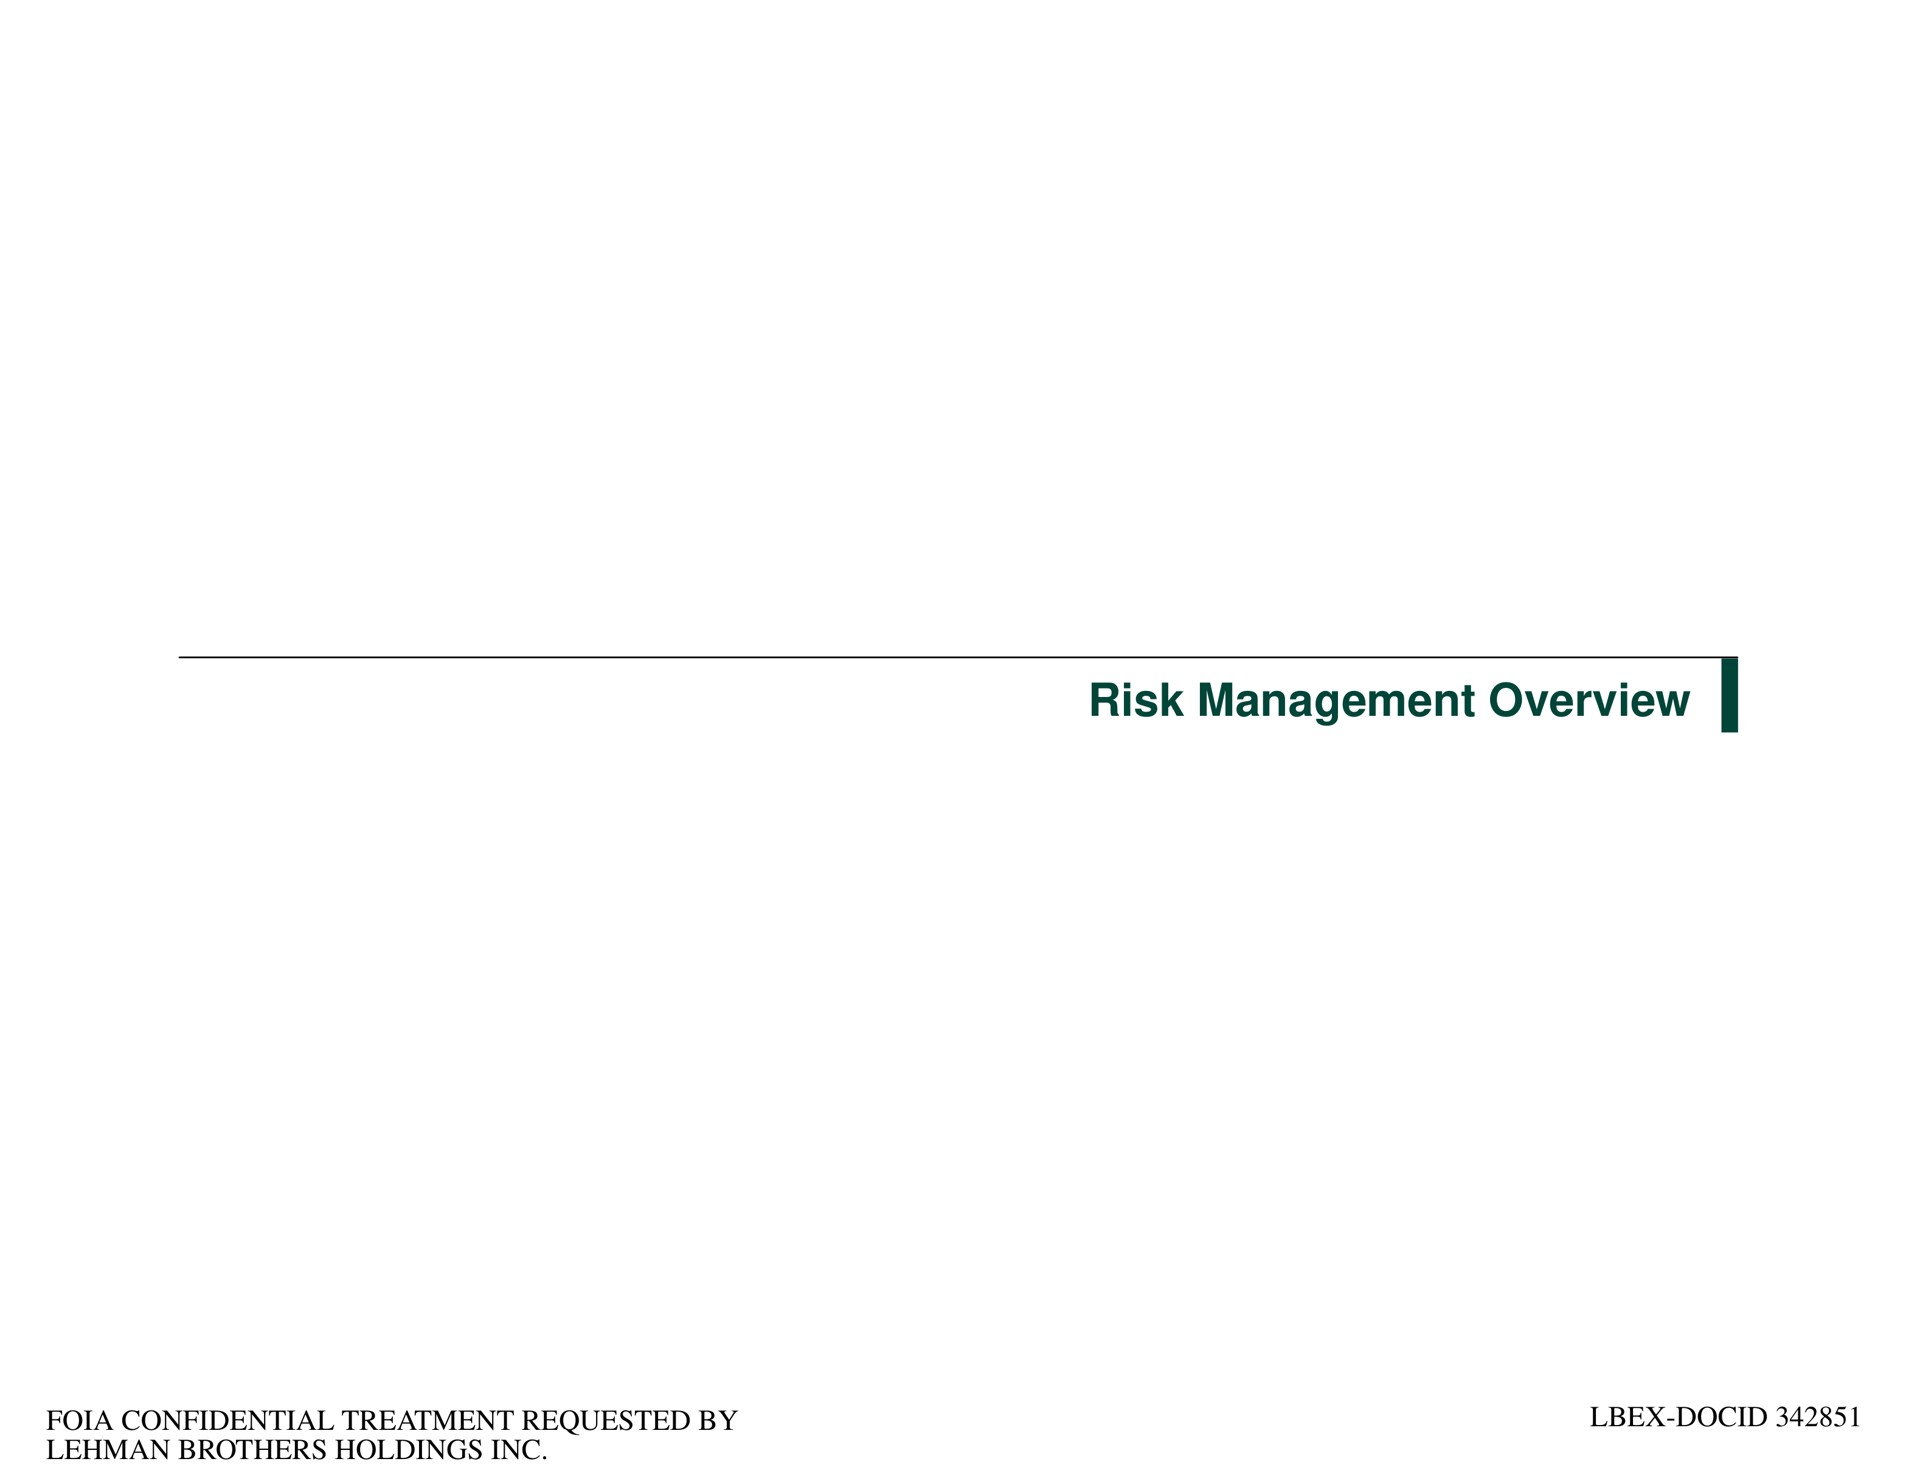 risk management overview | Lehman Brothers